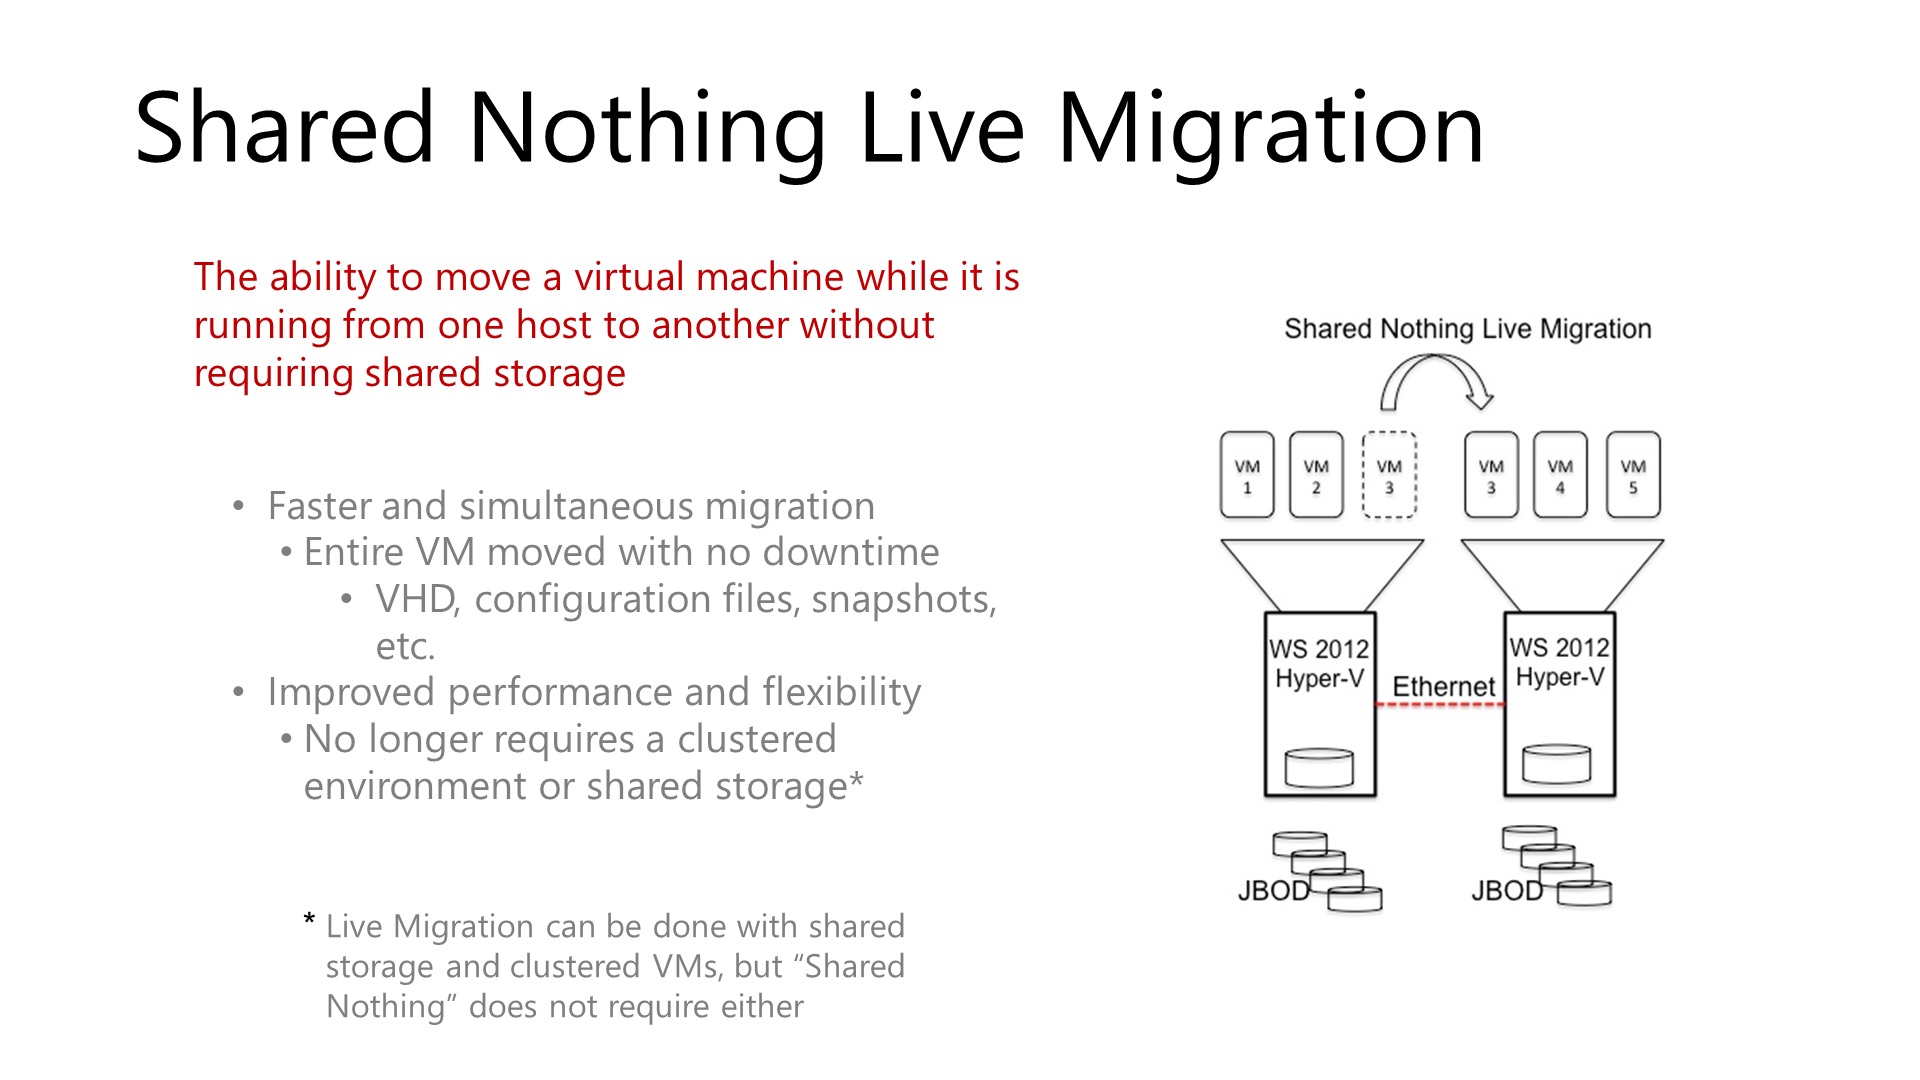 SHARED NOTHING LIVE MIGRATION